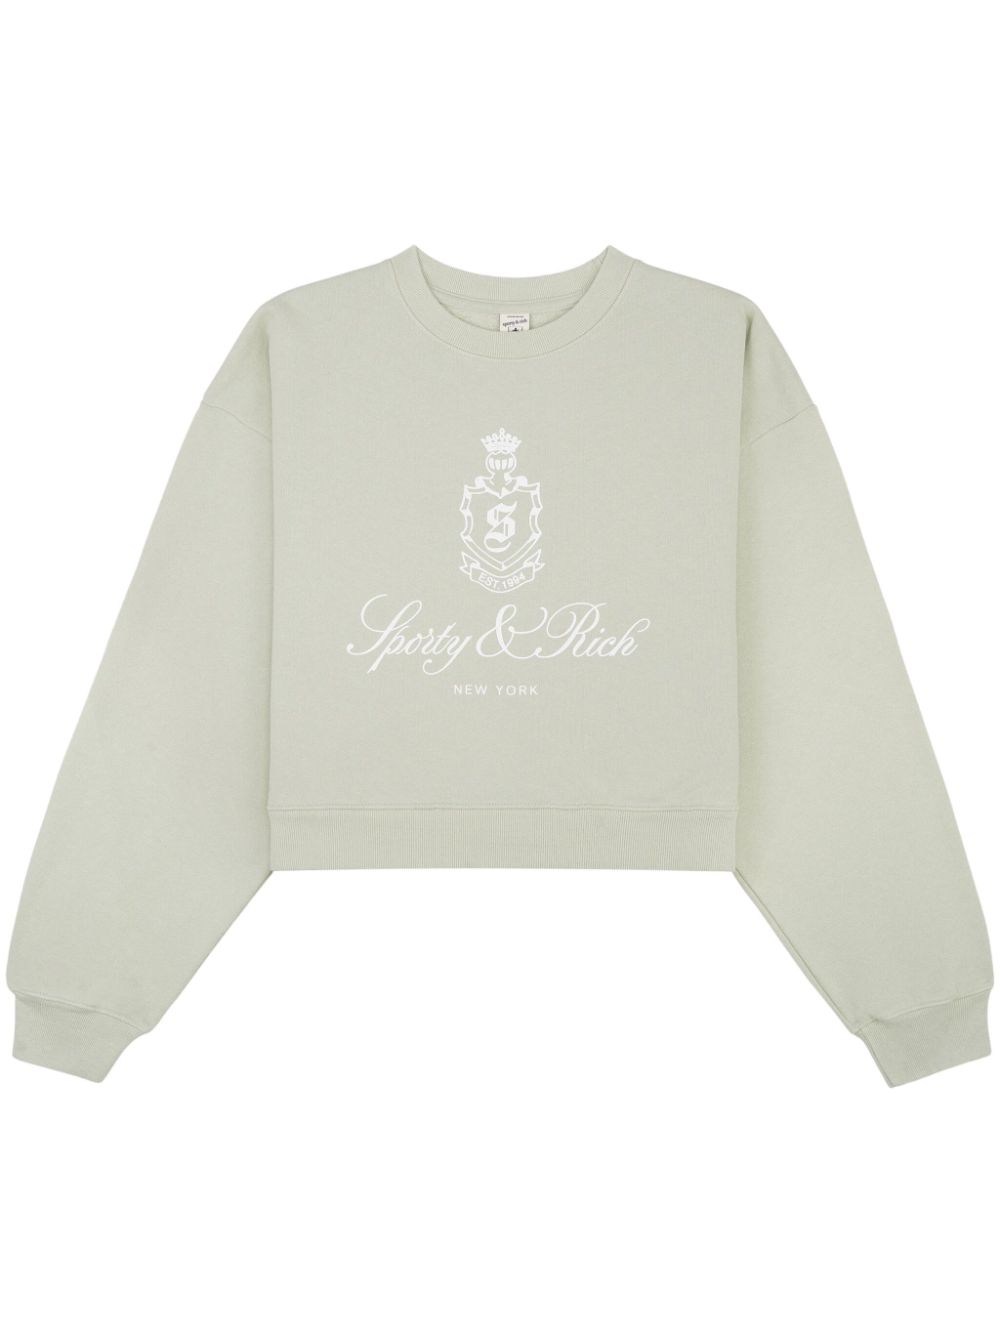 Shop Sporty And Rich Vendome Cropped Cotton Sweatshirt In Green